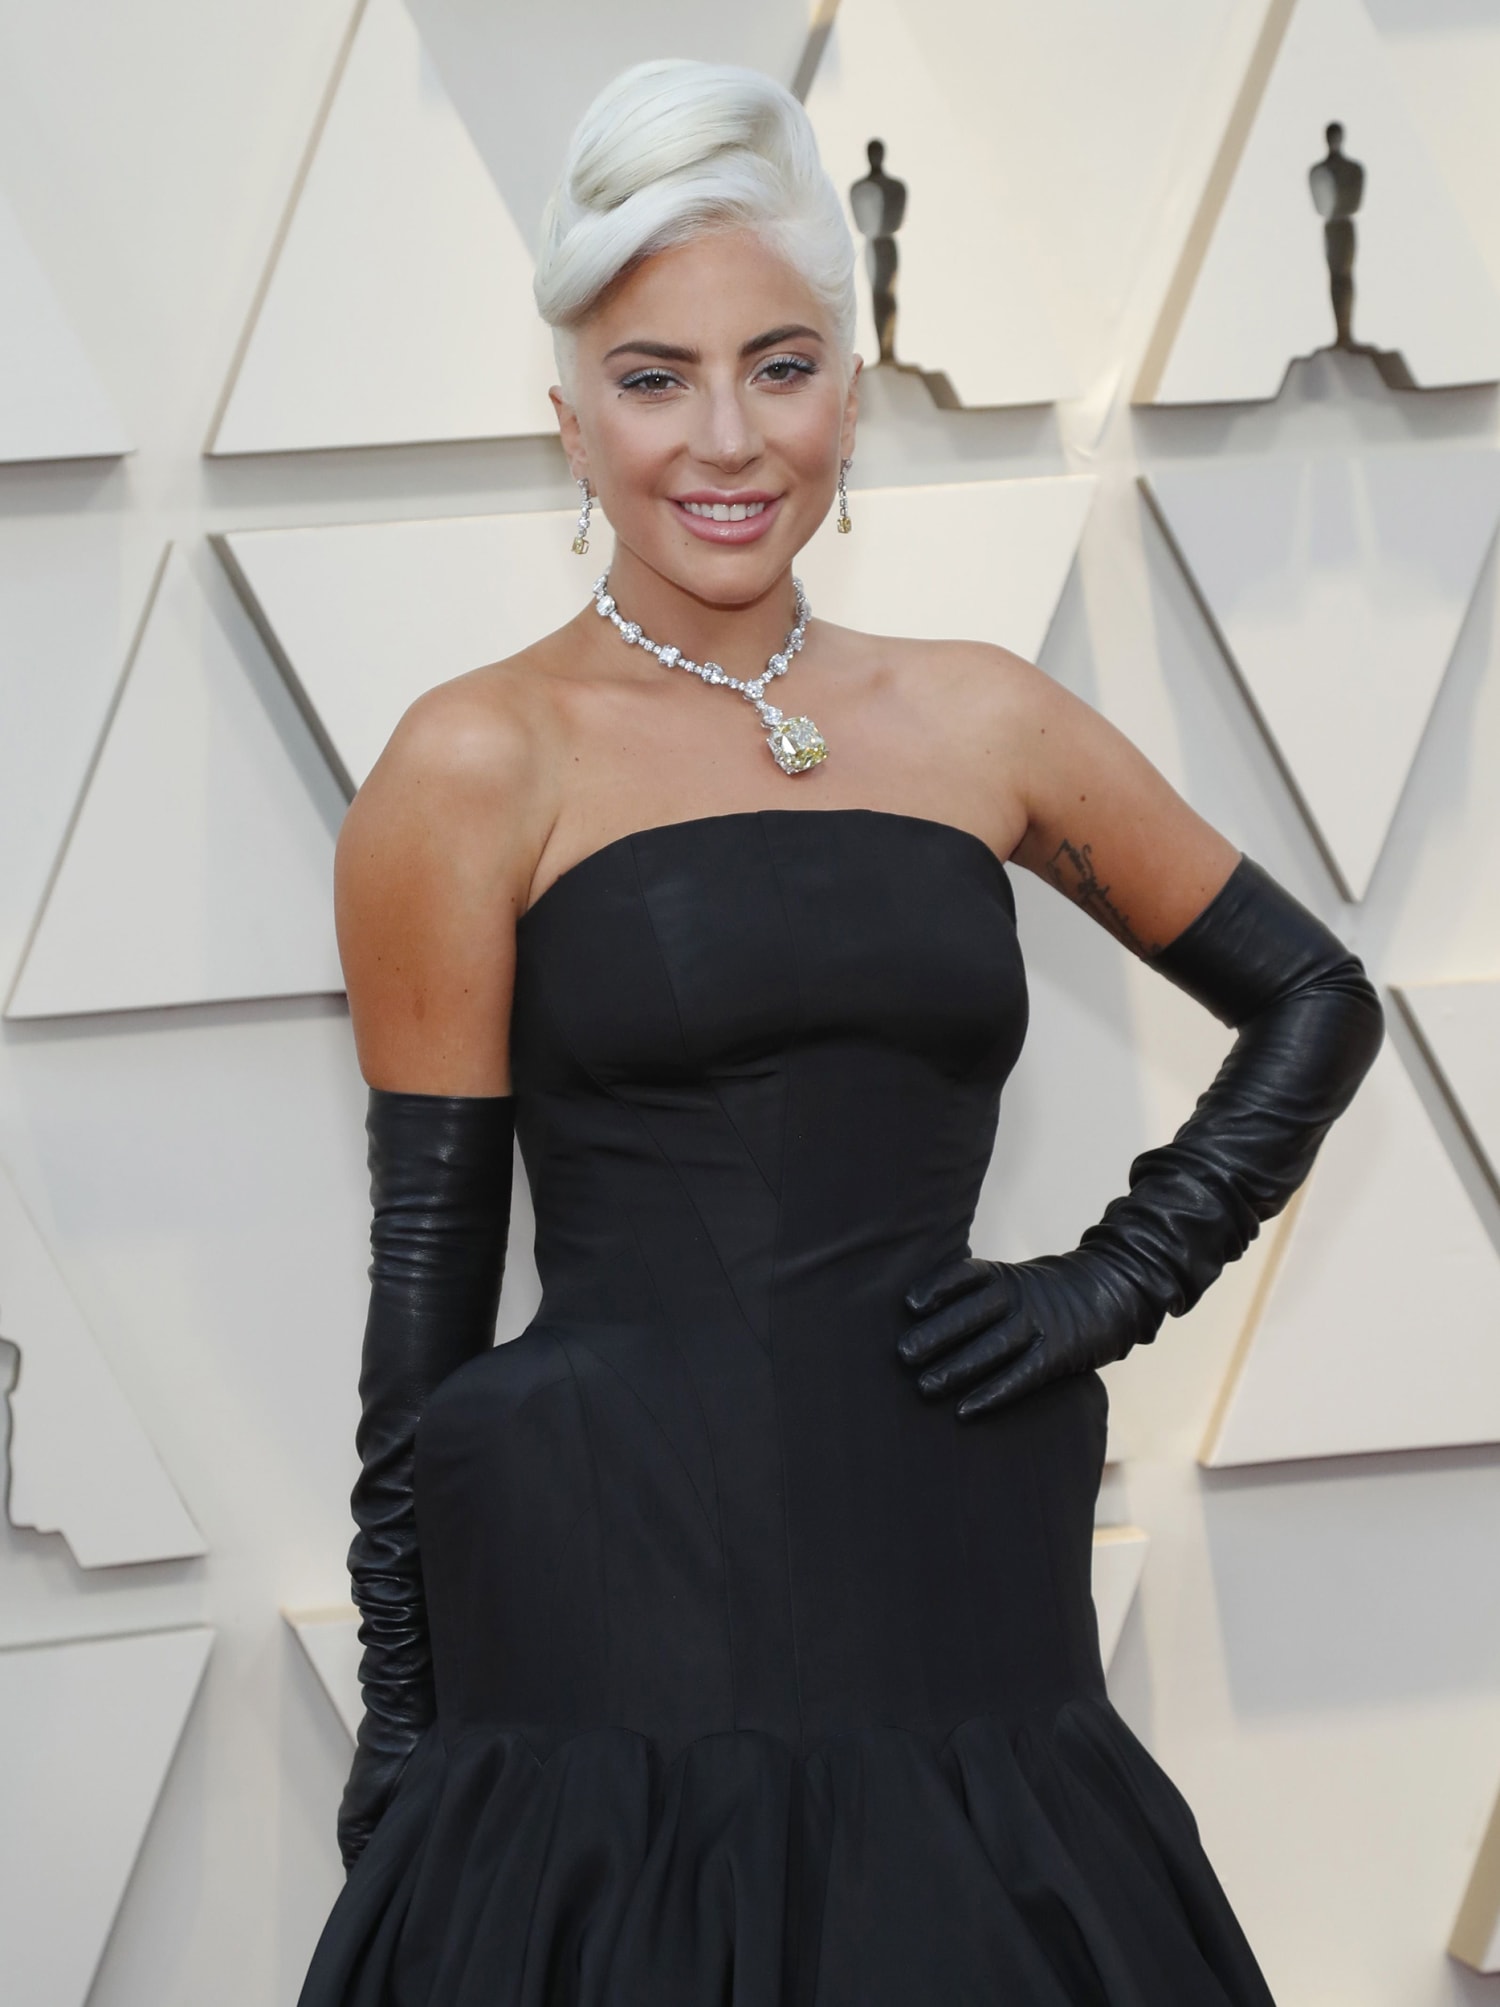 Best accessories from 2019 Oscars: Lady Gaga's $30 necklace, more